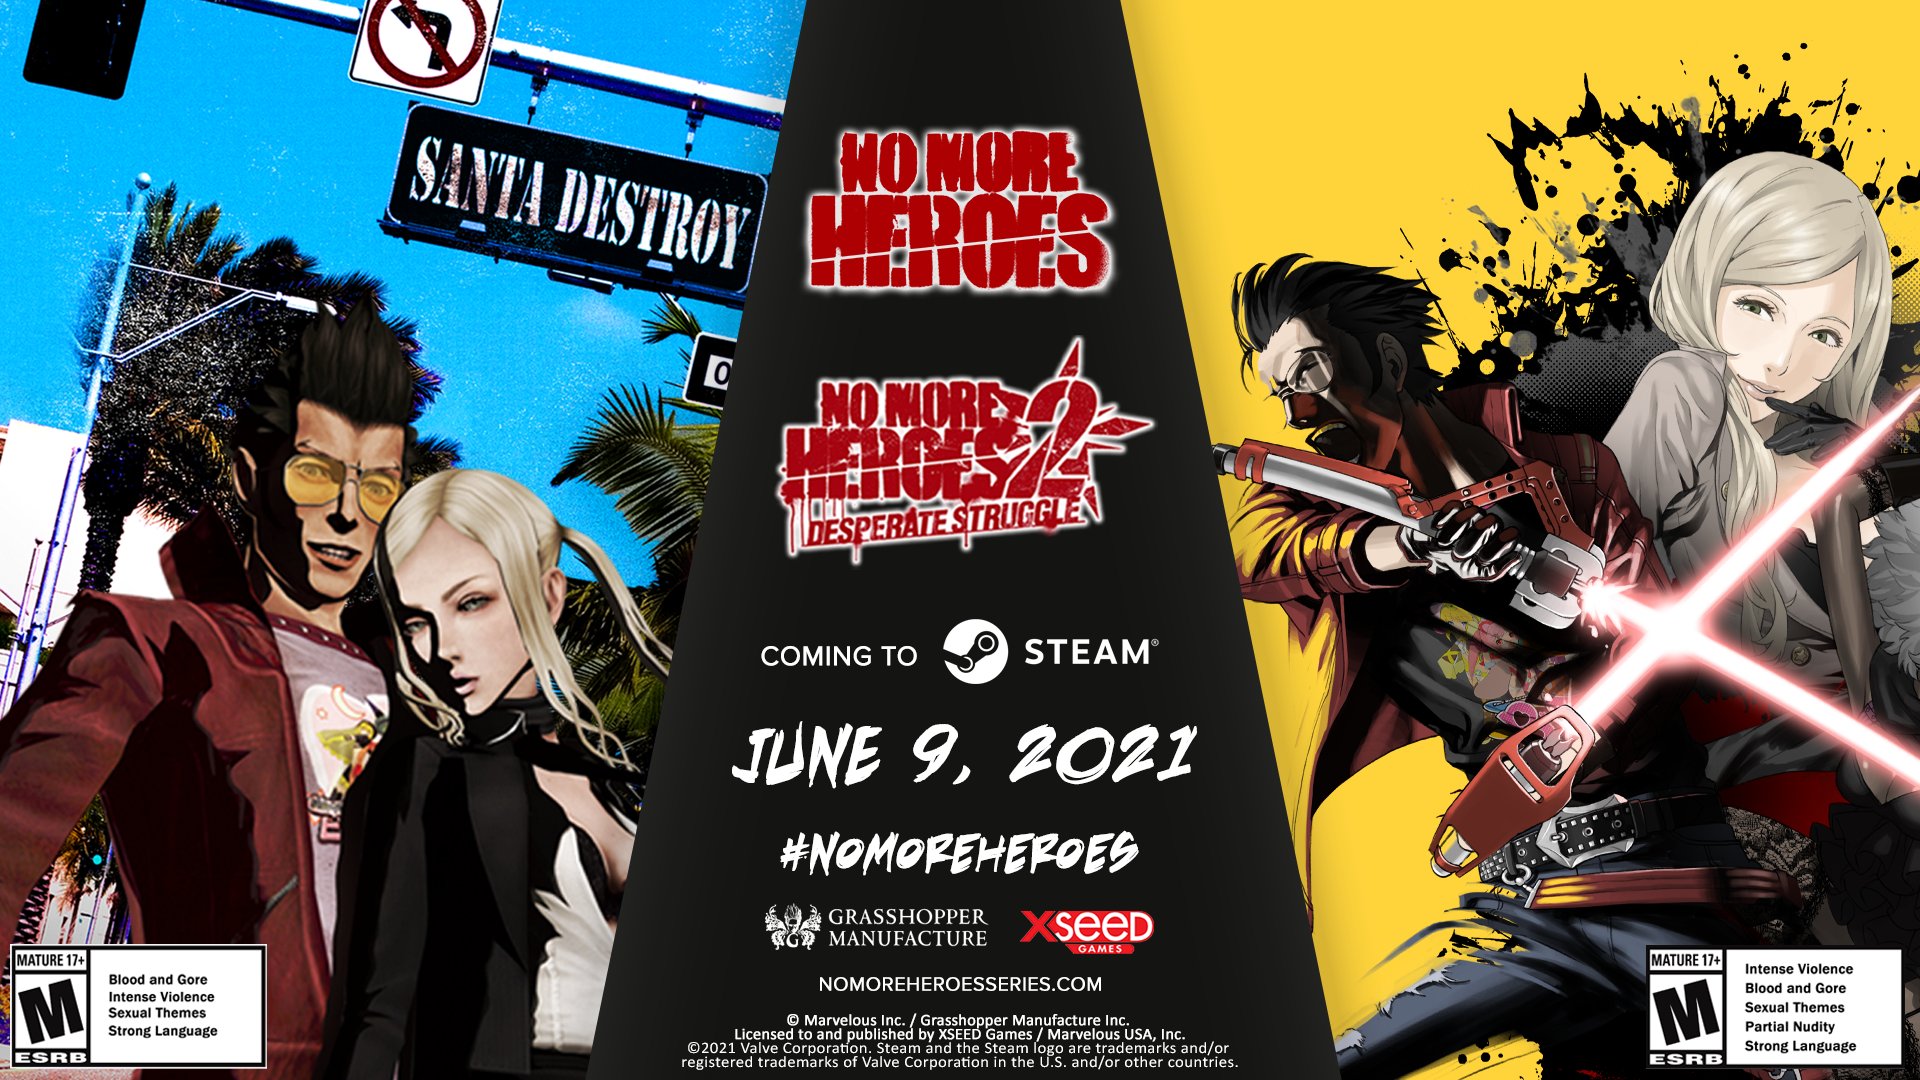 No More Heroes I & II coming to Steam